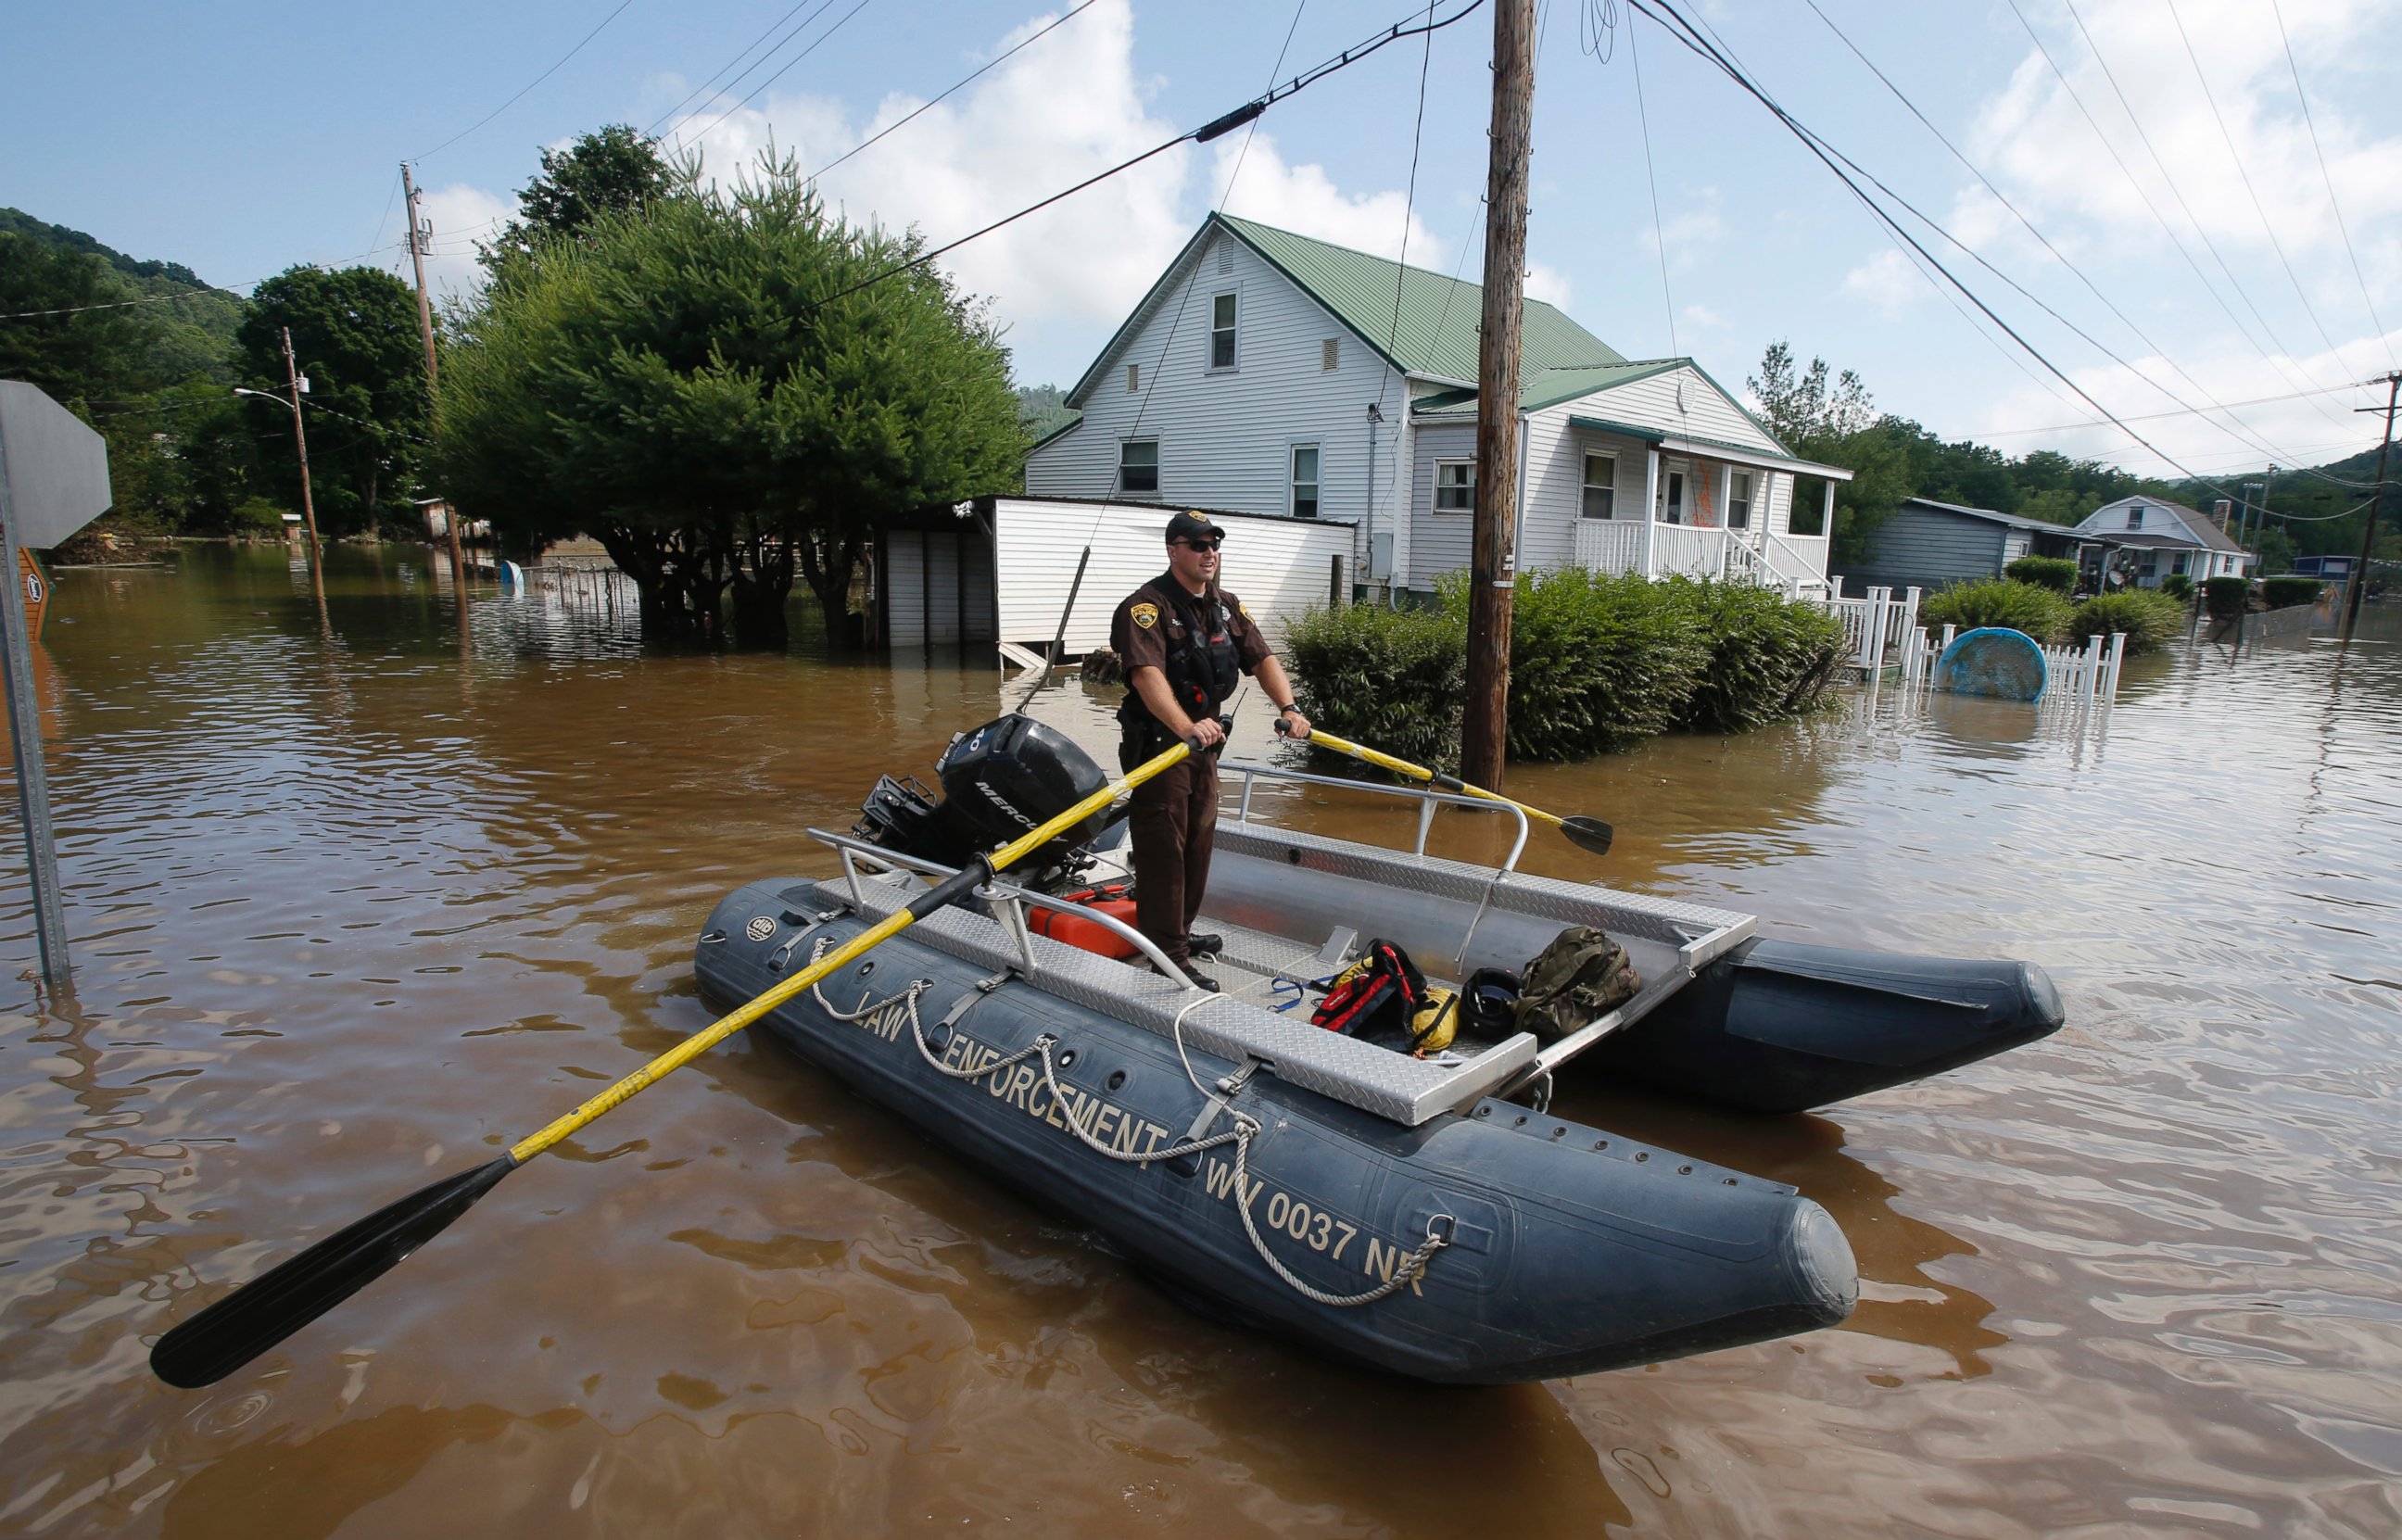 PHOTO: Lt. Dennis Feazell, of the West Virginia Department of Natural Resources, rows his boat as he and a co-worker search flooded homes in Rainelle, W.Va., June 25, 2016.  